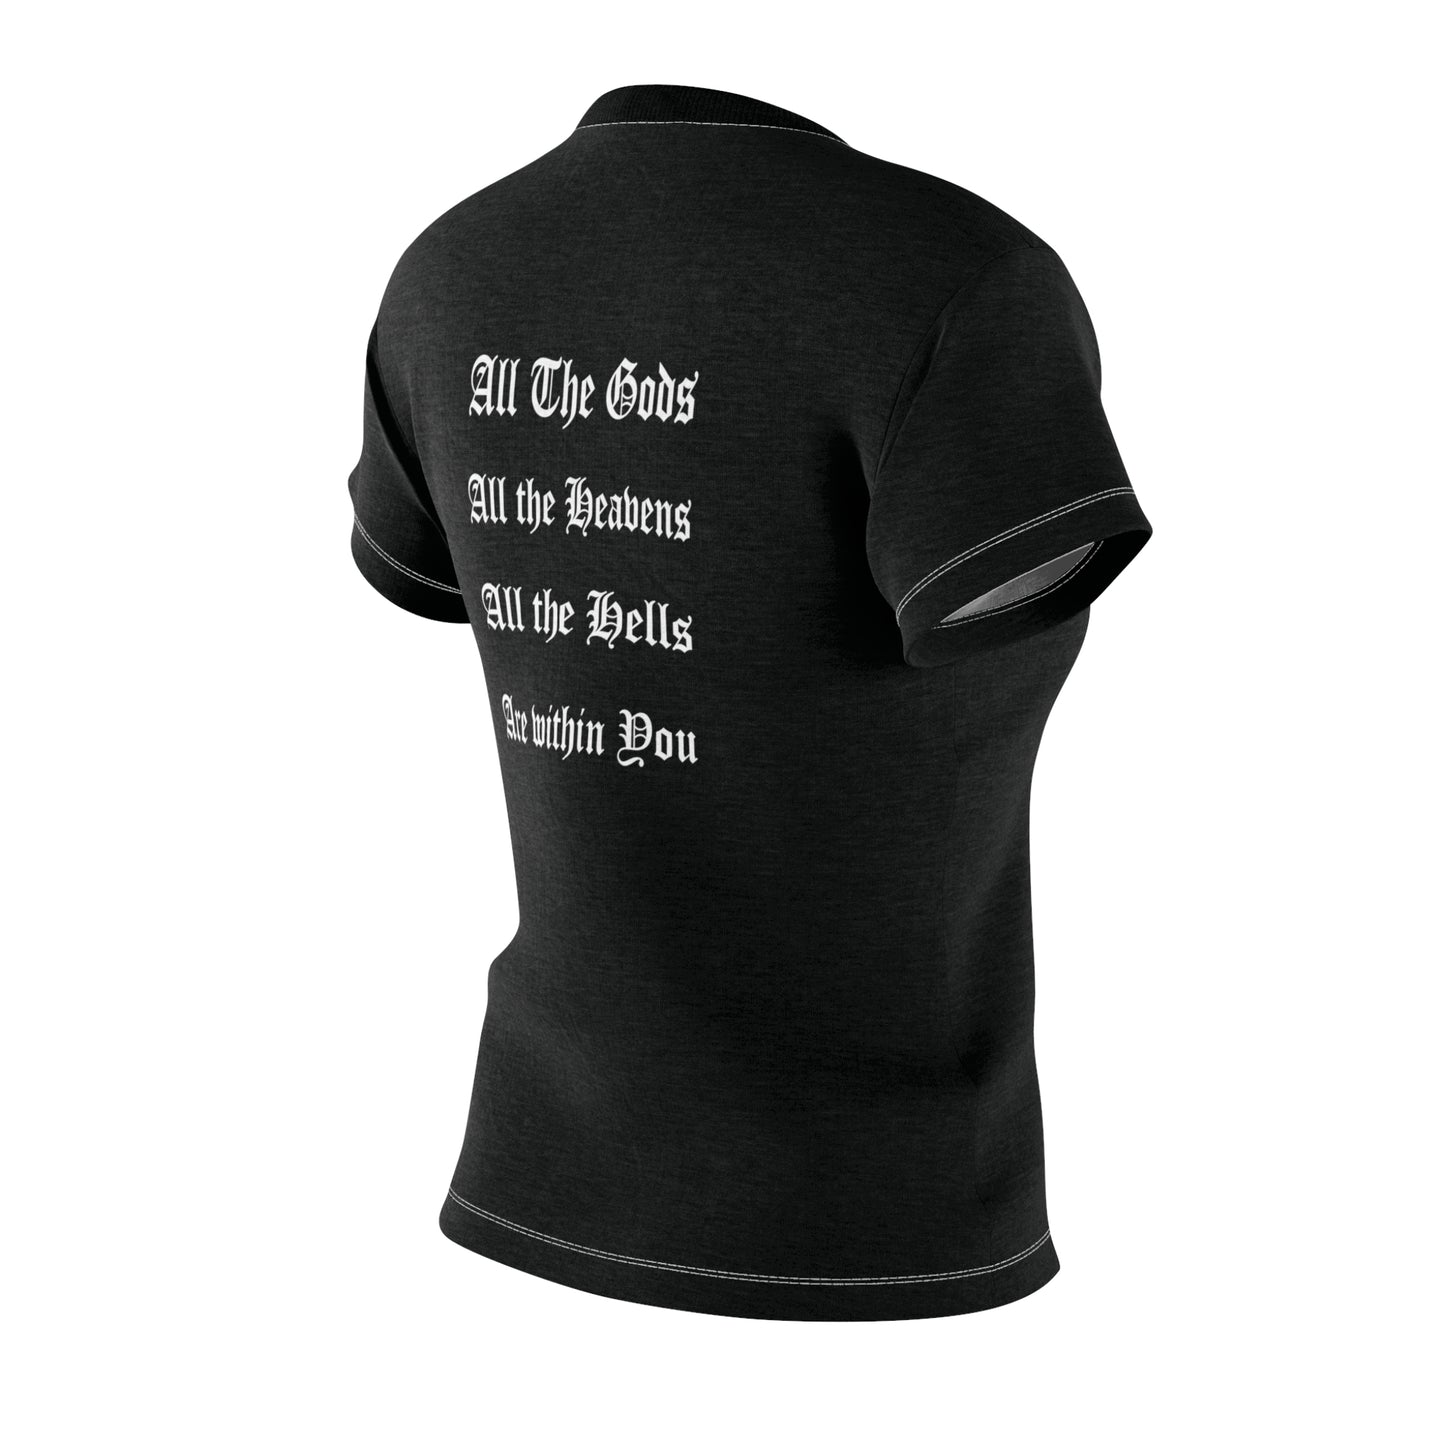 All the Gods Quote Women's Cut & Sew Tee (AOP)